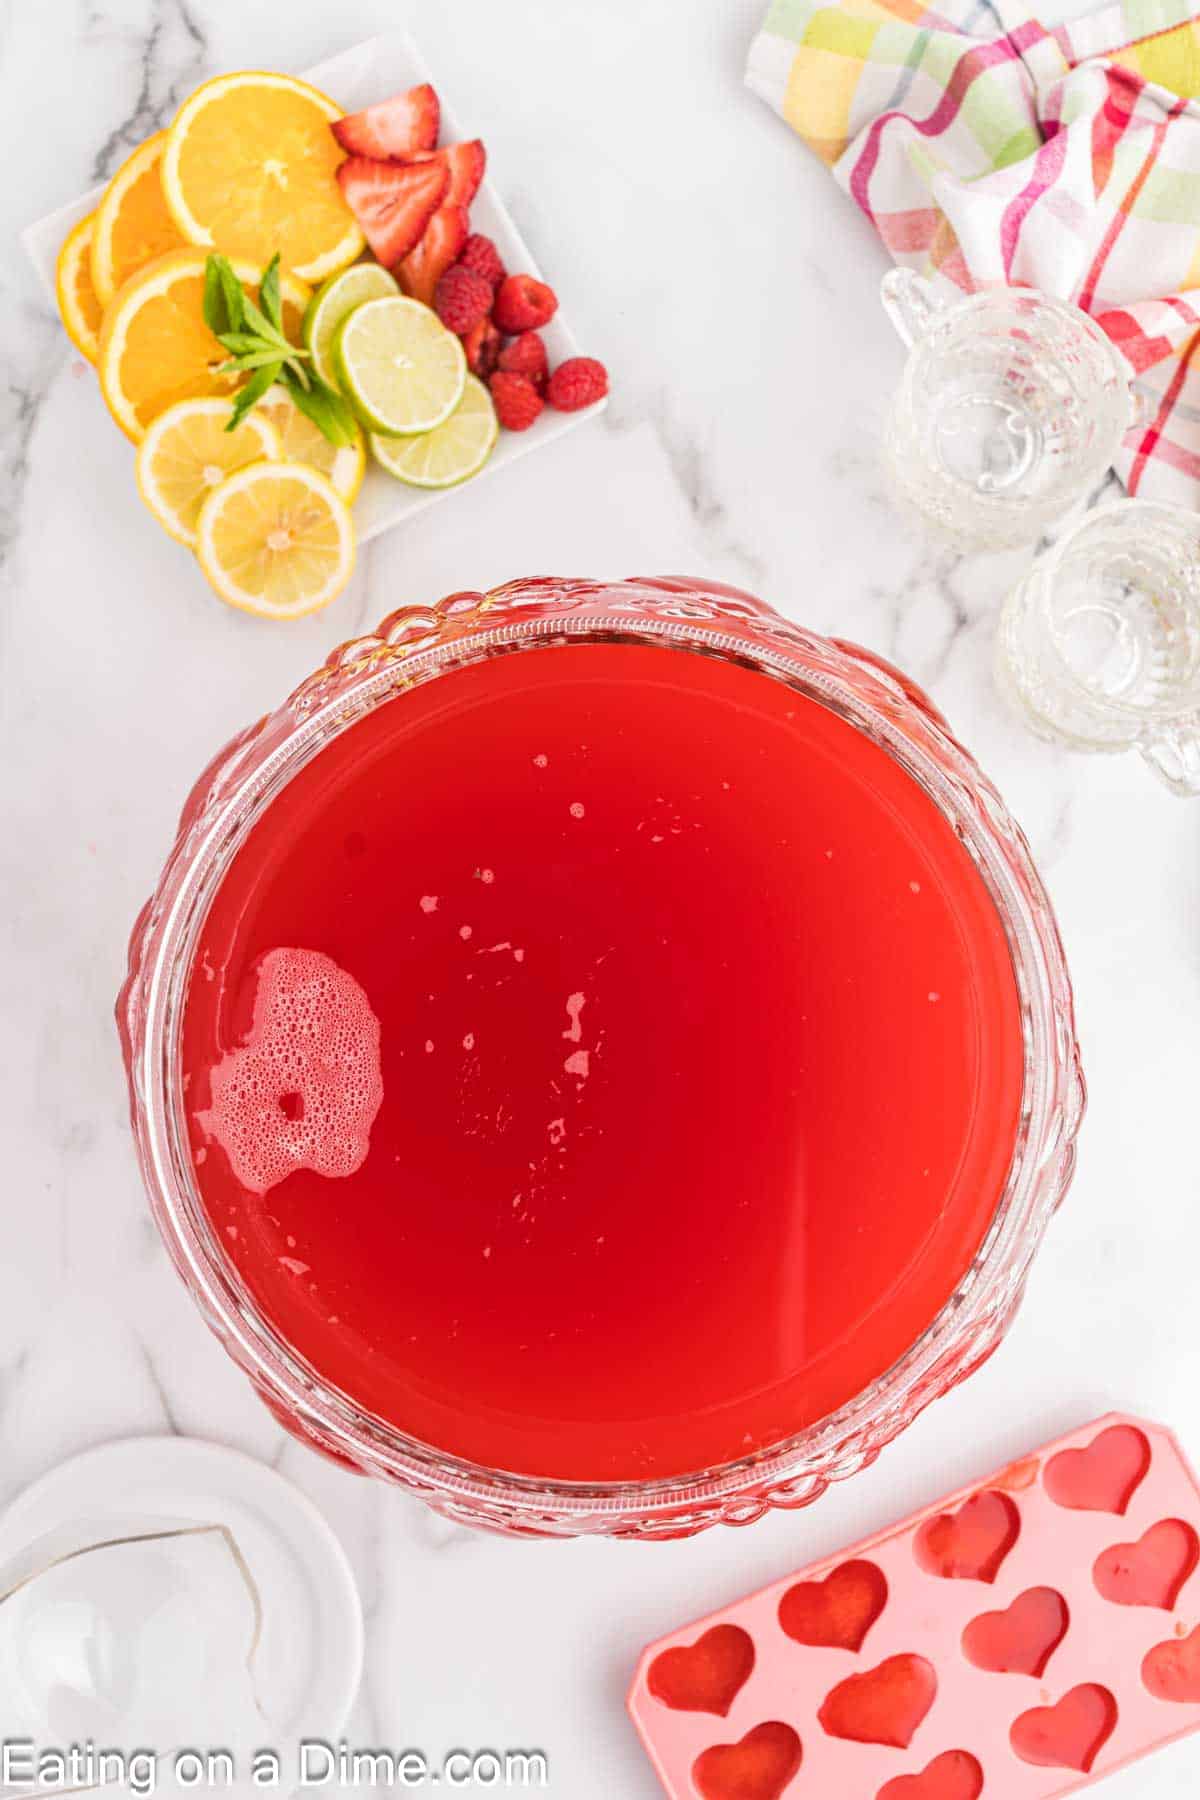 Party punch in a large clear bowl with a plate of lemon slices, orange slices, lime slices and strawberries